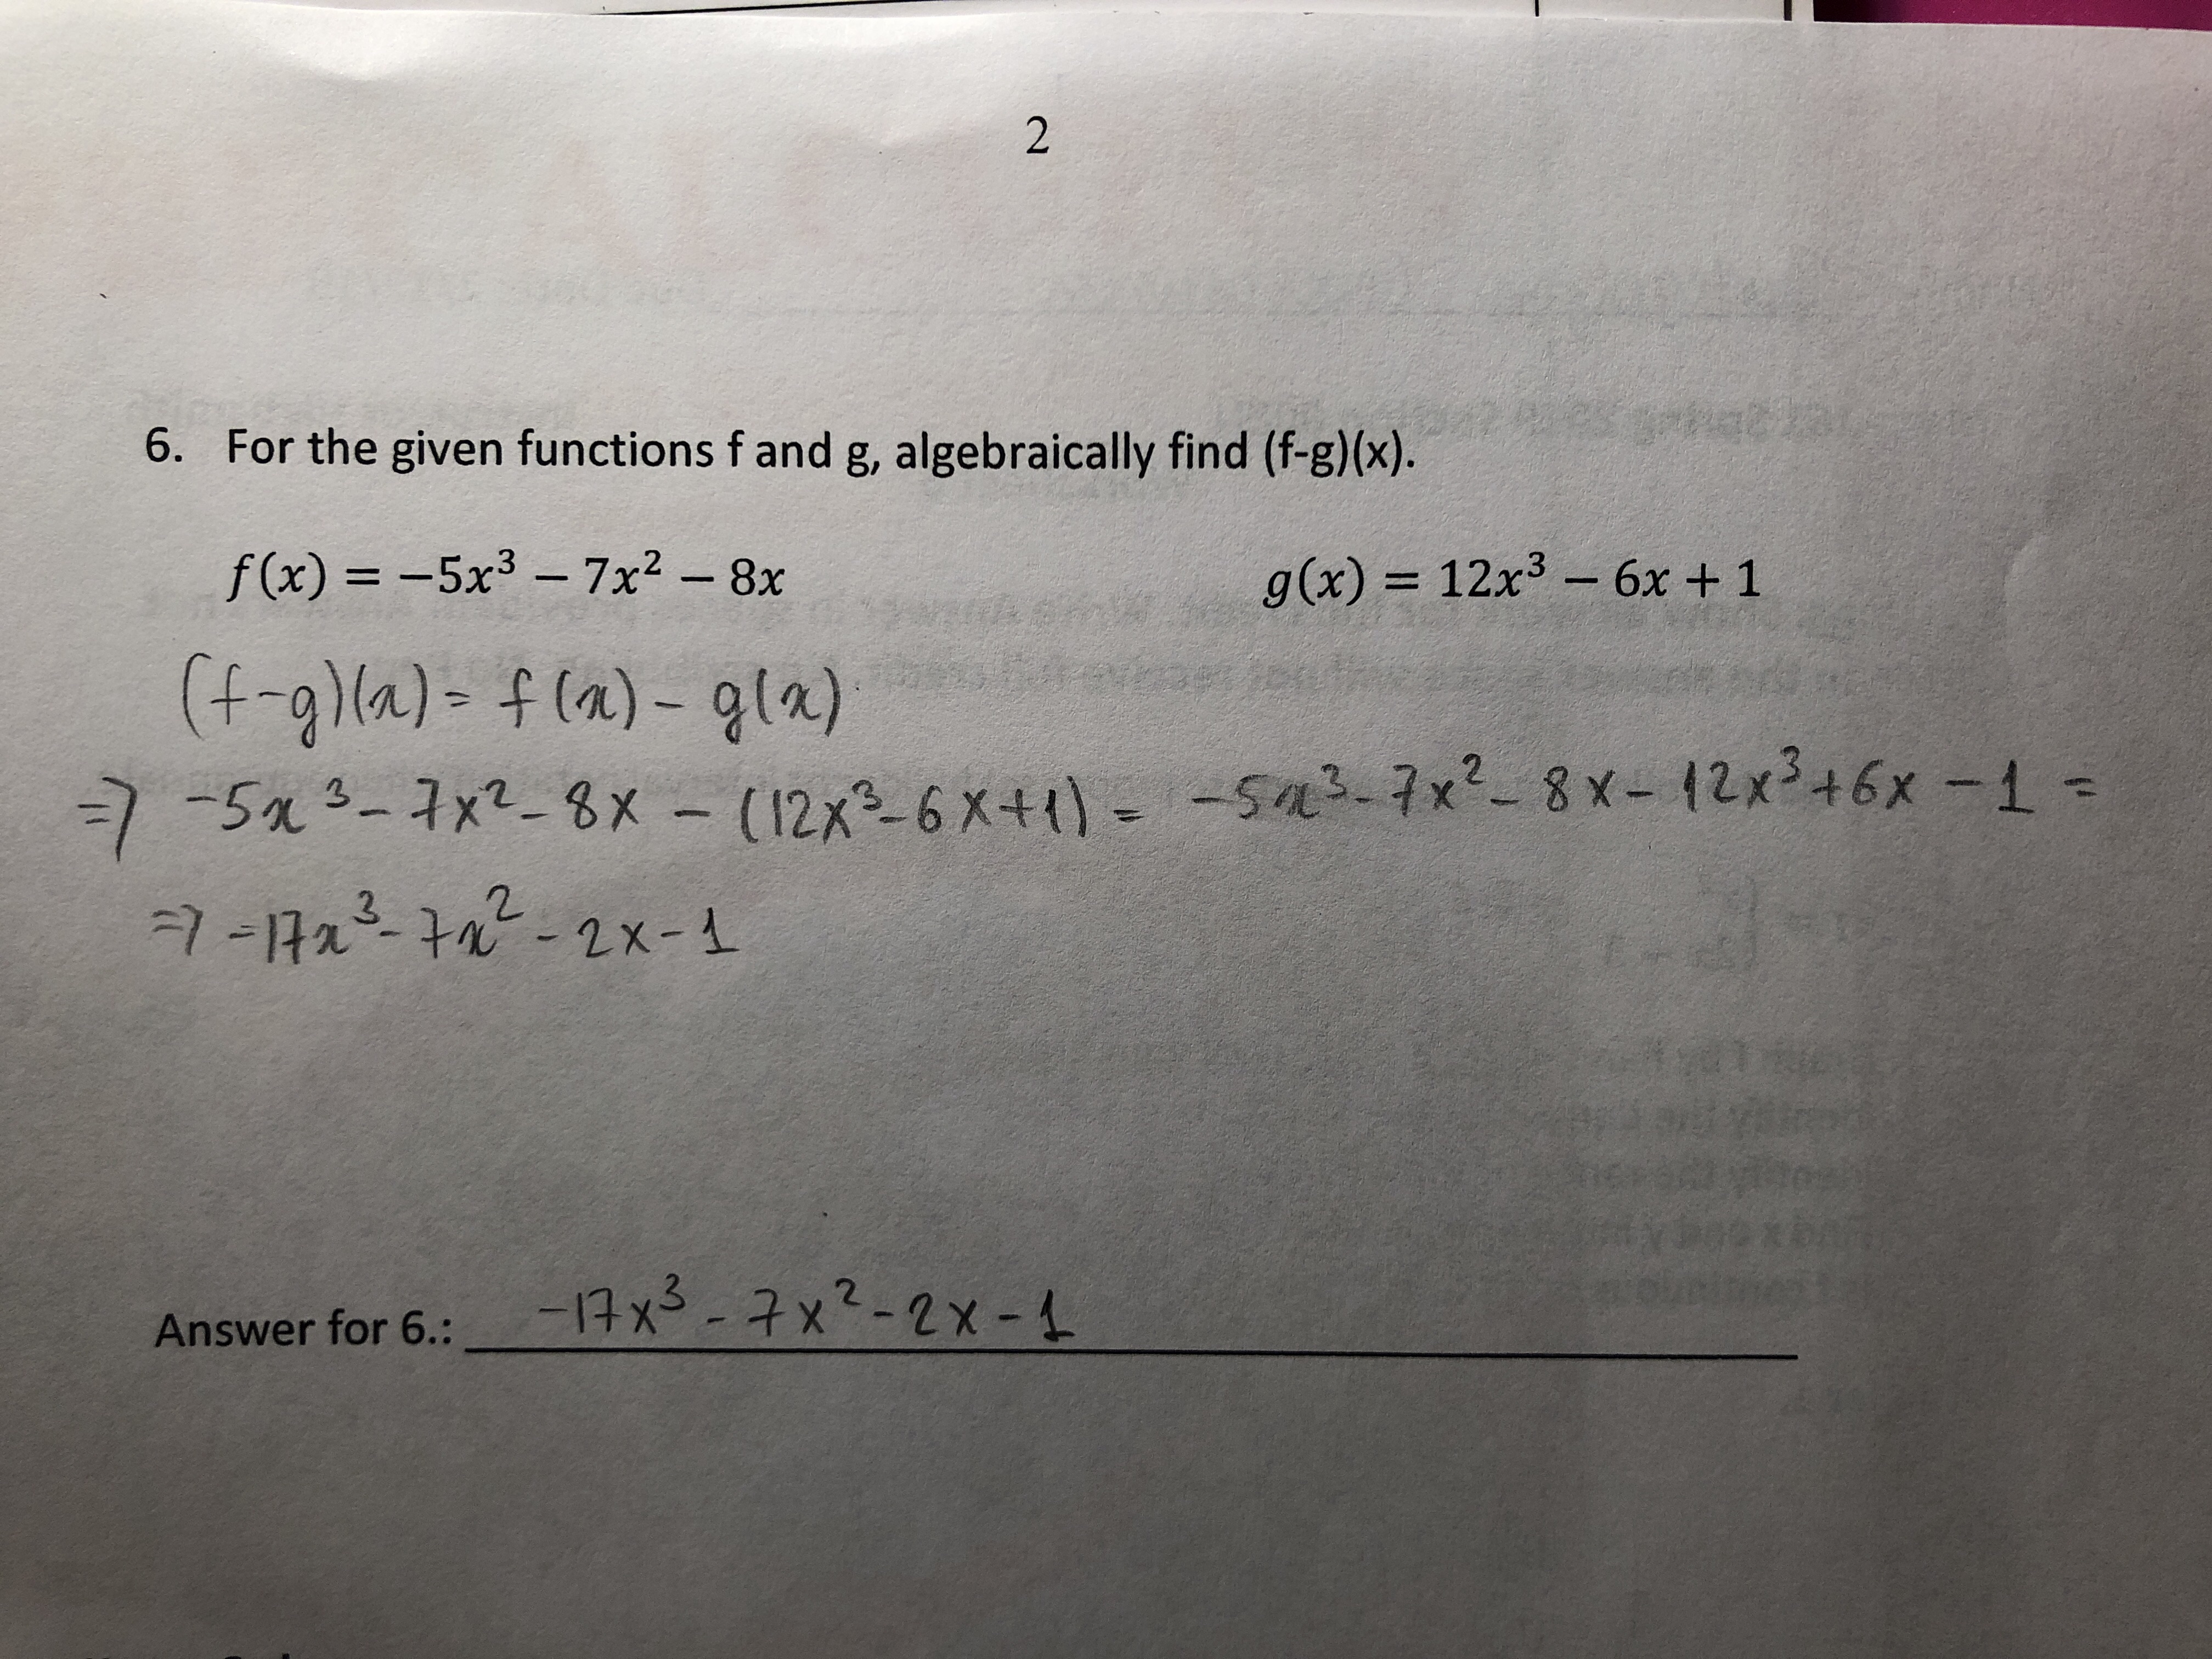 6.
For the given functions f and g, algebraically find (f-g)(x).
f(x) =-5x3-7x2-8x
g(x) 12x3-6x +1
(f-g)a) (a)-ga)
Answer for 6.:-
Answer for 6.:-qx®
Xs--t
x2-2x-
